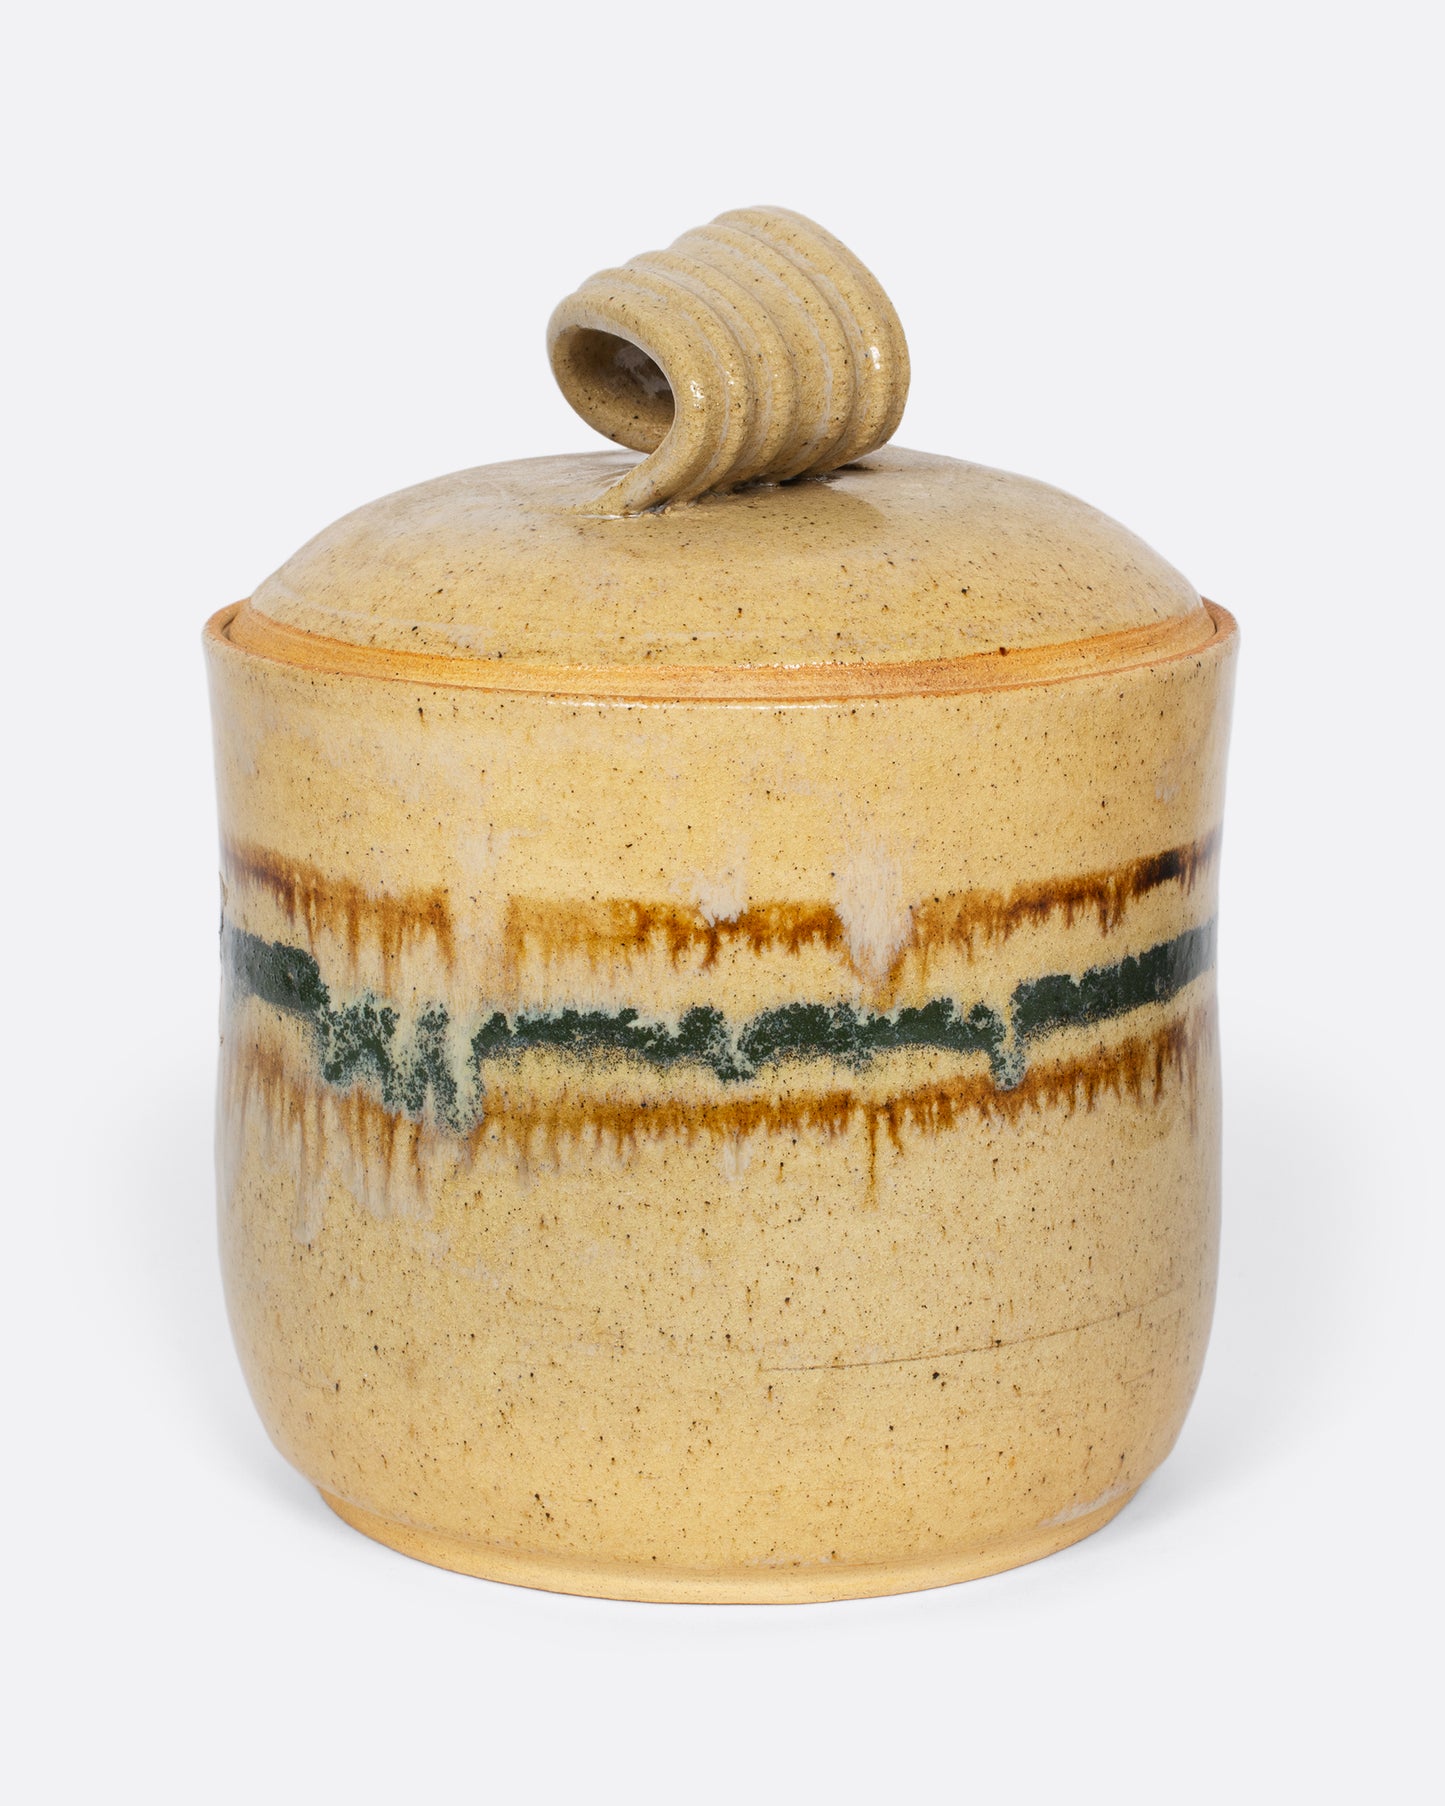 A vintage ceramic speckled jar with blue and brown abstract stripes and a twisted handle. A one-of-a-kind place to store sugar or your favorite dry good.